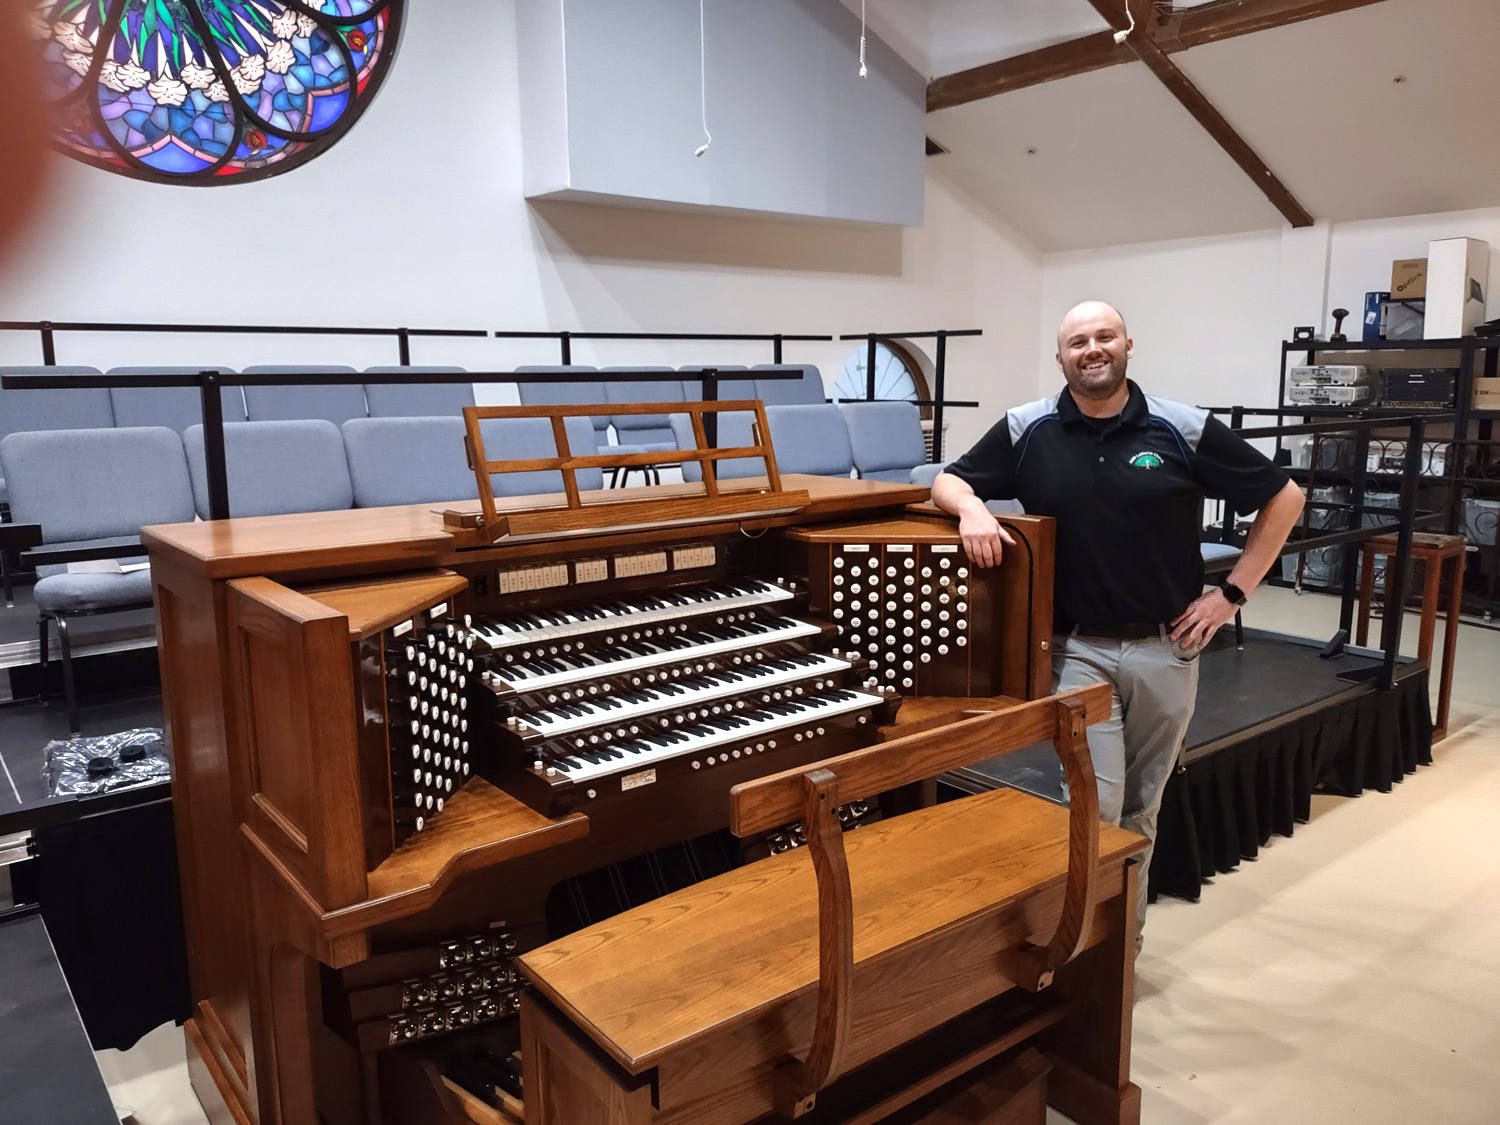 “The RLX-90, designed by acclaimed organist Rudy Lucente, with the new APEX technologies have taken the Allen Organ Company to unimaginable heights in the world of digital organ audio production. The organ can produce such realistic sounds that the auditory line separating digital organs and pipe organs is virtually gone. With the expansive capabilities of APEX, the realistic sounds are far beyond all expectations. I am constantly left speechless every time I play the instrument. In cooperation the with Allen Organ Company, this was all made possible due to the tireless efforts of the incomparable team of Brian Daggett, Ted Hayes, and the rest of Dunne Music in Florida. Everyone involved went above and beyond all imaginable actions to help give life to the project and see it to its final fruition. The Allen Organ Company and Dunne Music have created a product that will be a pinnacle instrument throughout the entire organ world.”  Matthew Swingle Director of Music & Organist Faith Lutheran Church | Naples, Florida      Custom RL-90 - Faith Lutheran Church Naples, FL - Organist Matthew Swingle proudly displays the church's newest member! This is Floridia's first Four-Manual Allen Organ with Allen's APEX Technology.